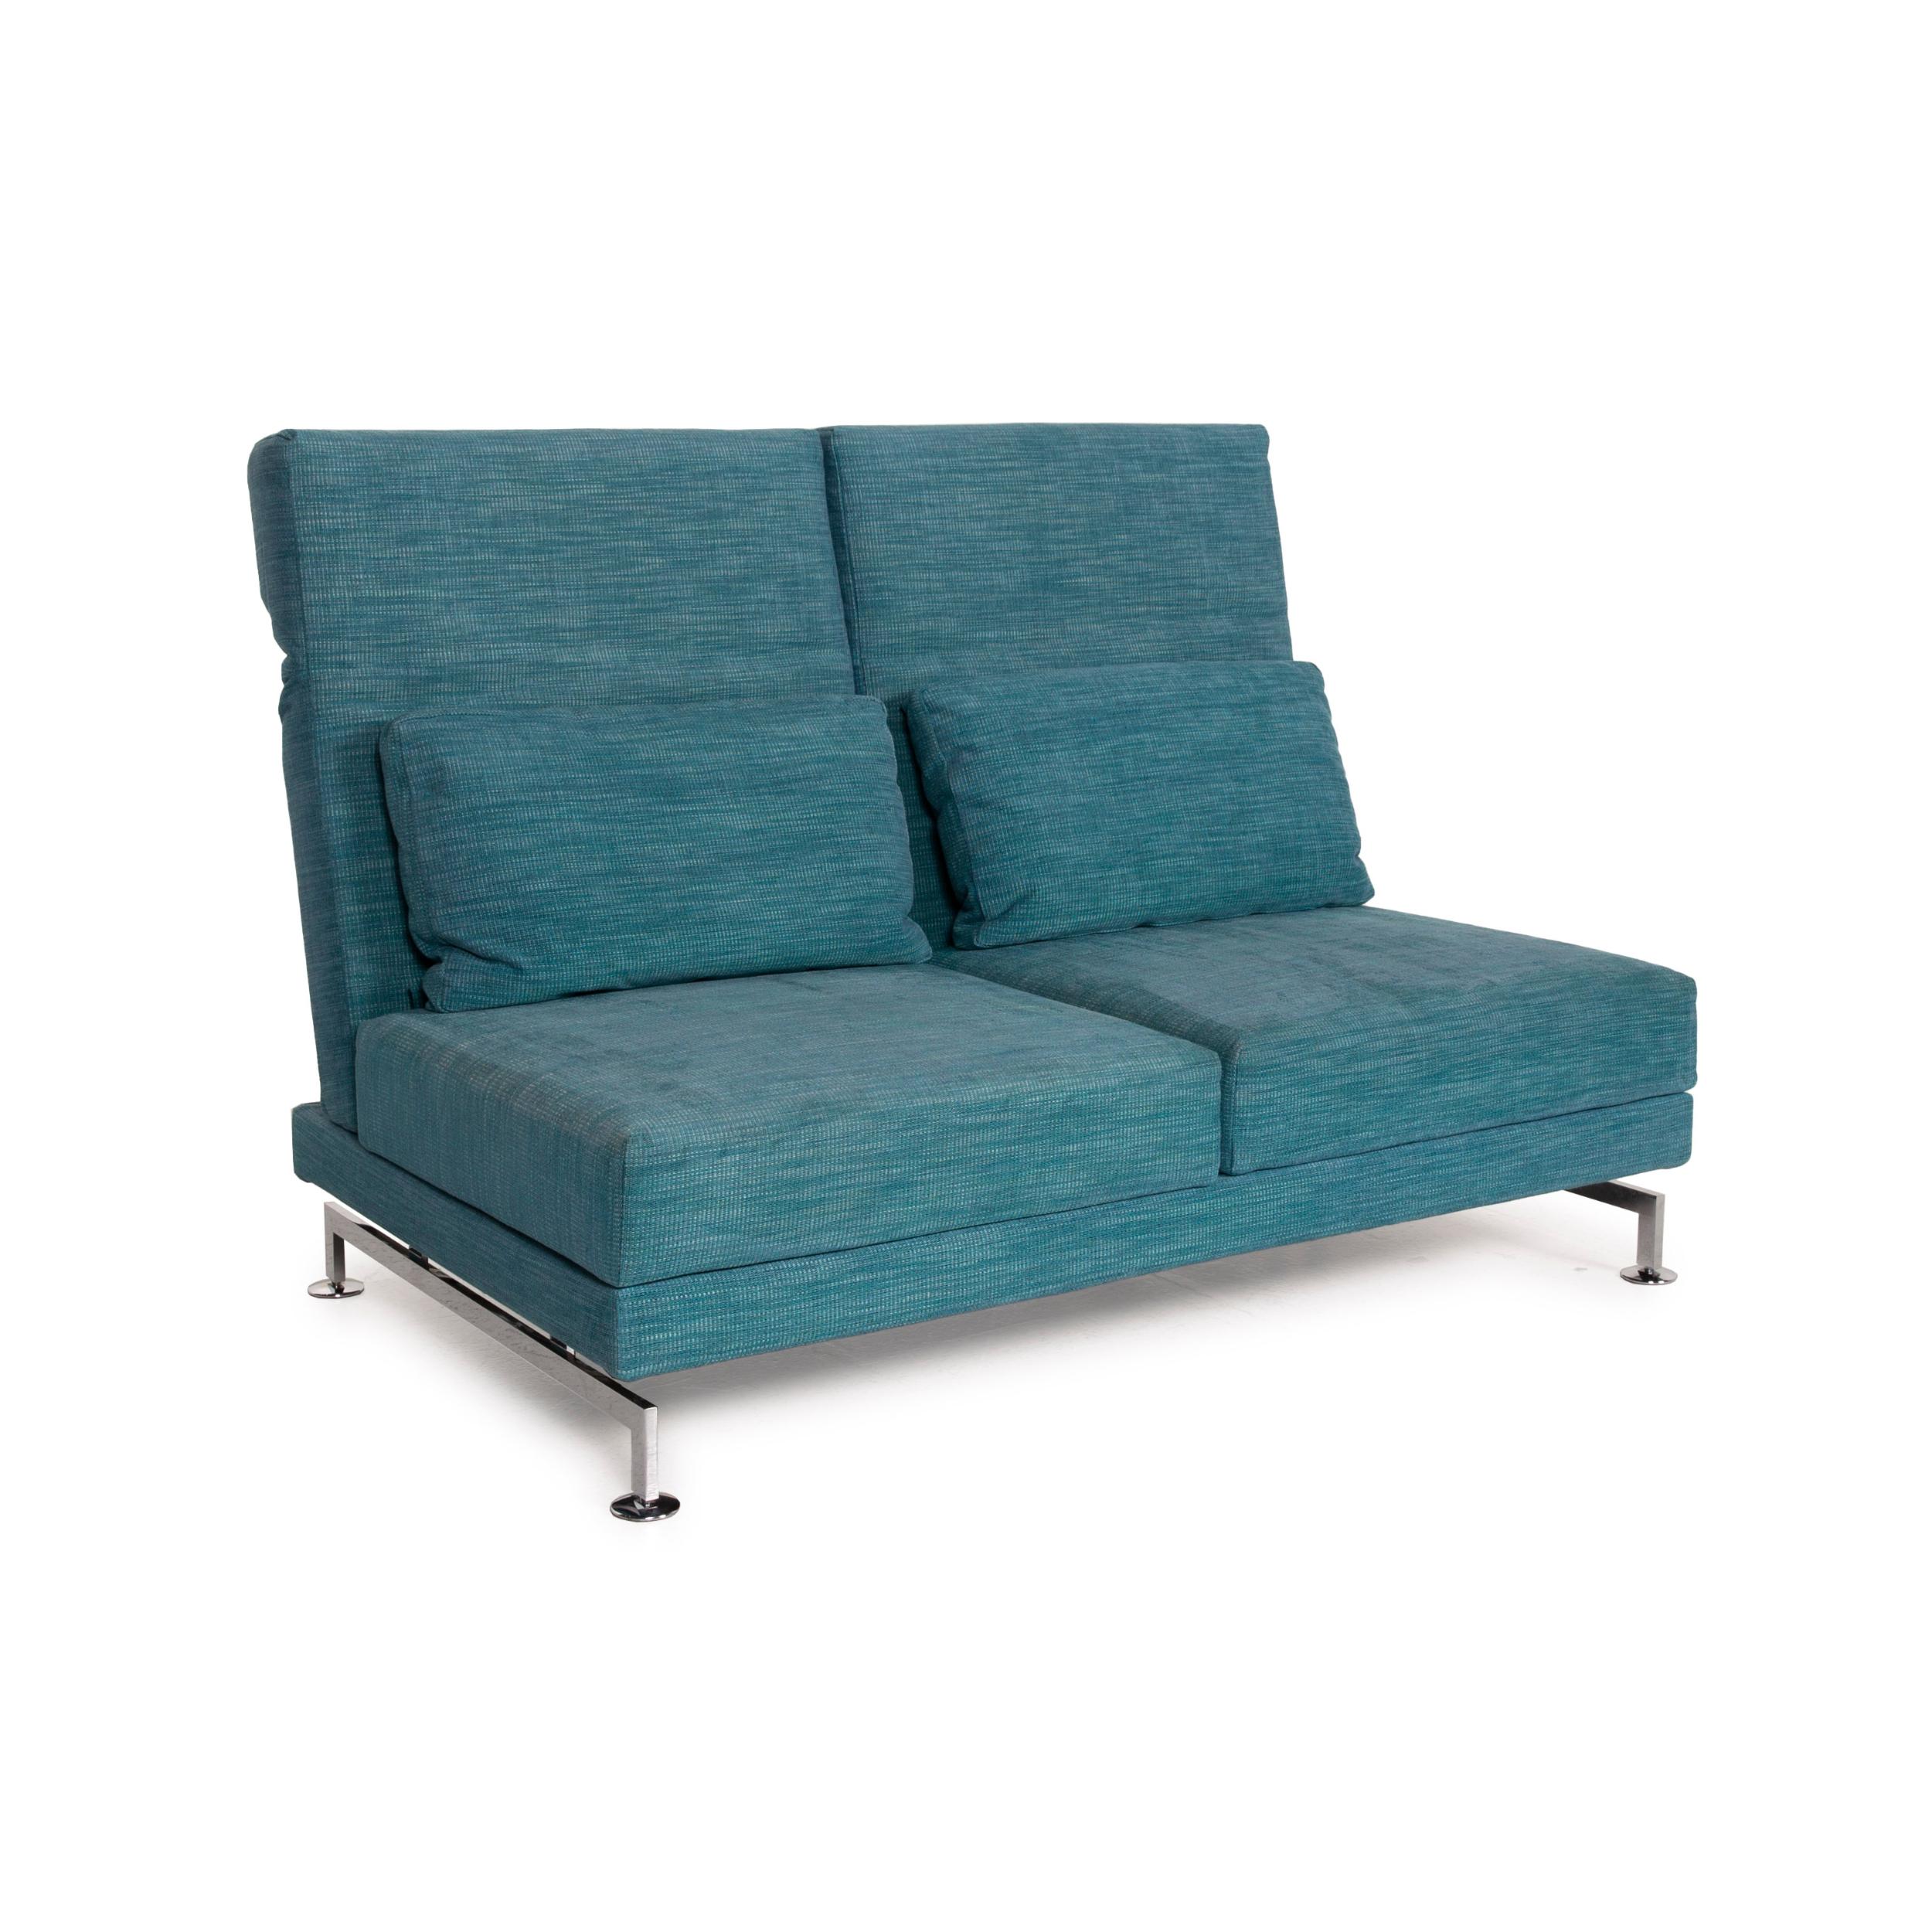 Brühl & Sippold Moule Fabric Sofa Blue Two-Seater Reclining Function Turquoise For Sale 2